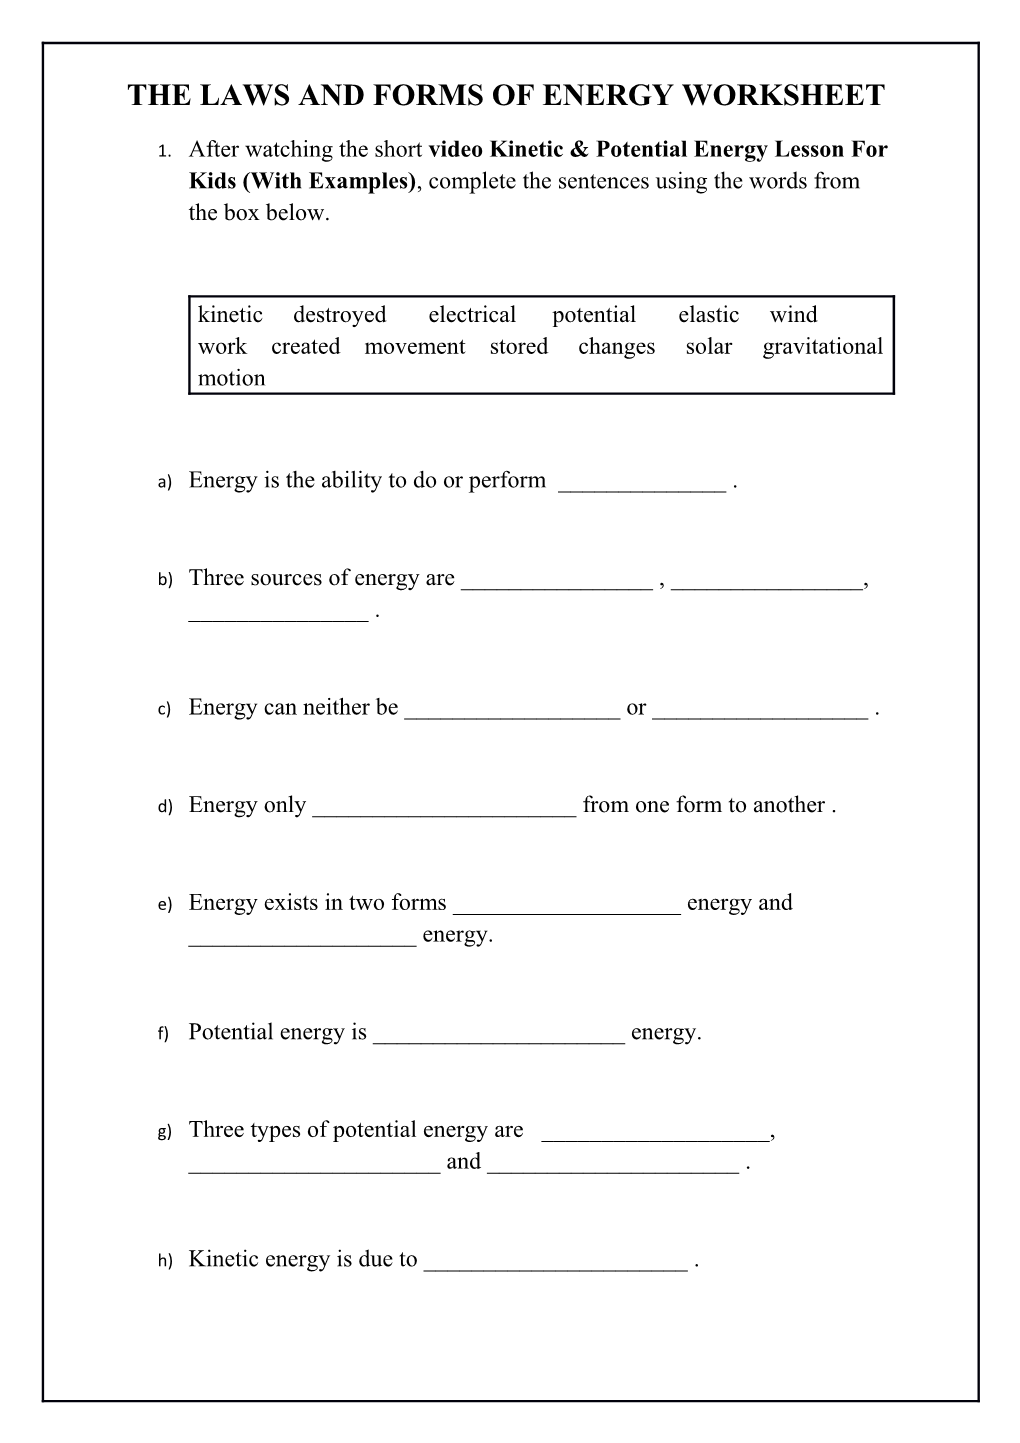 The Laws and Forms of Energy Worksheet